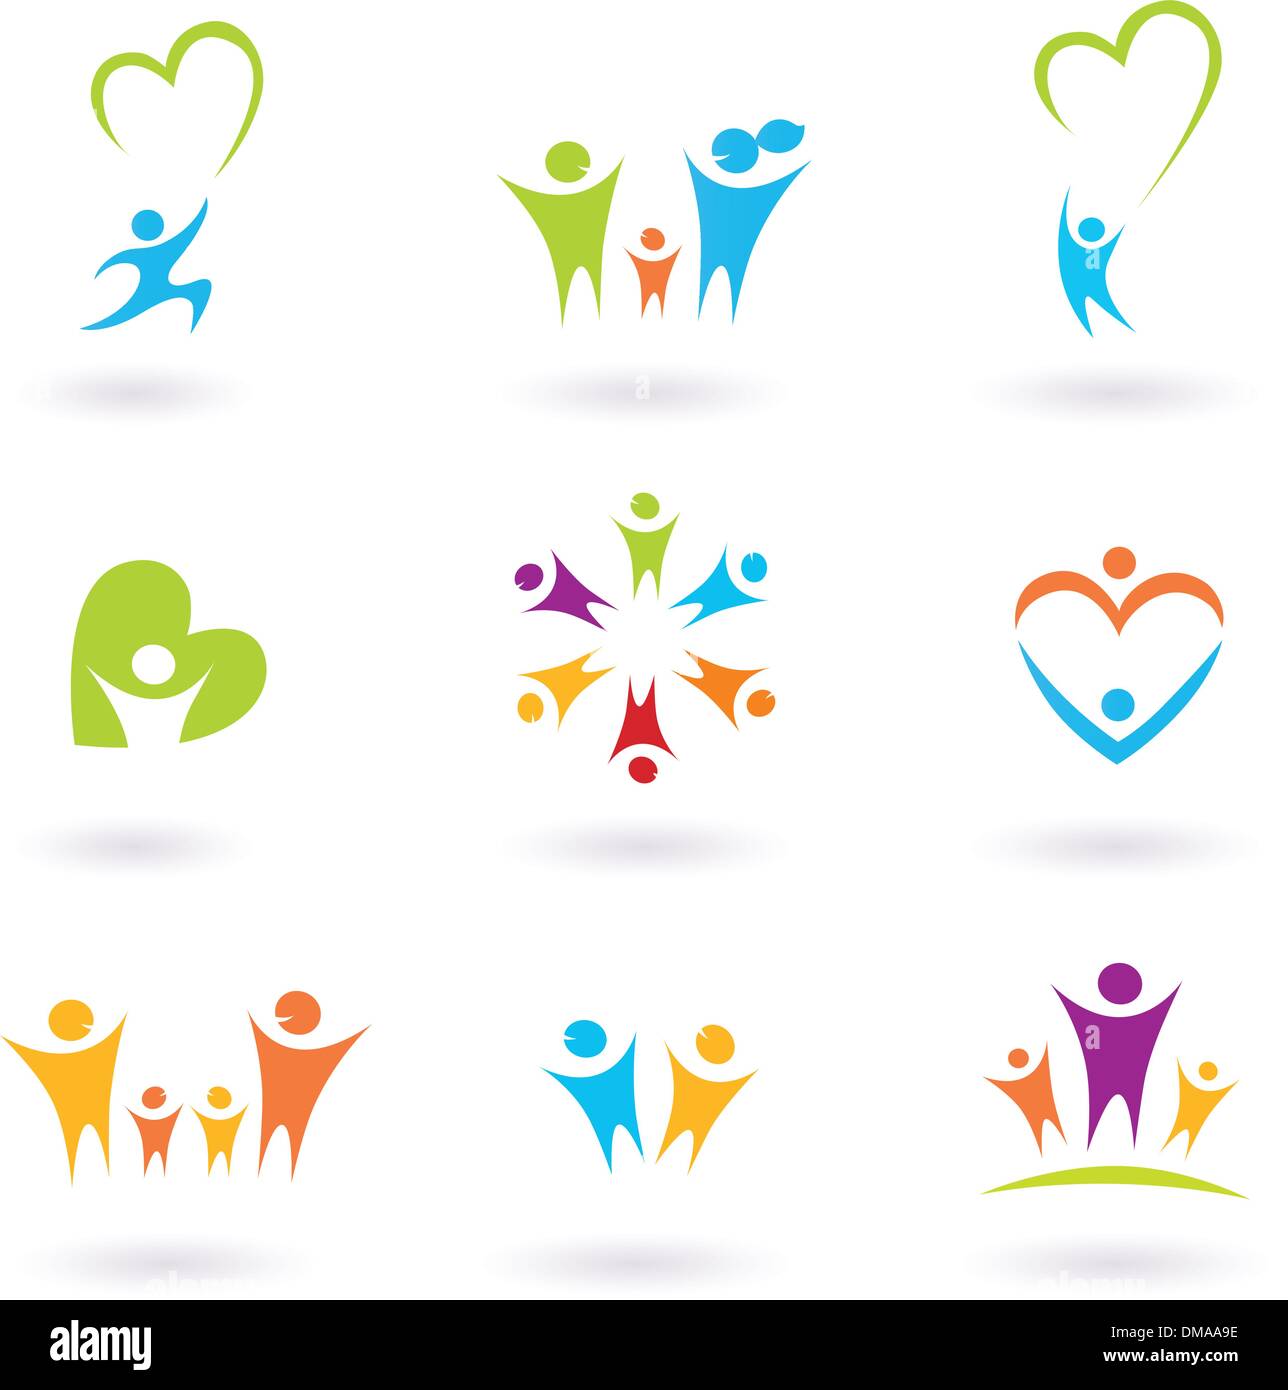 Children, family, community and protection icons and symbols Stock Vector